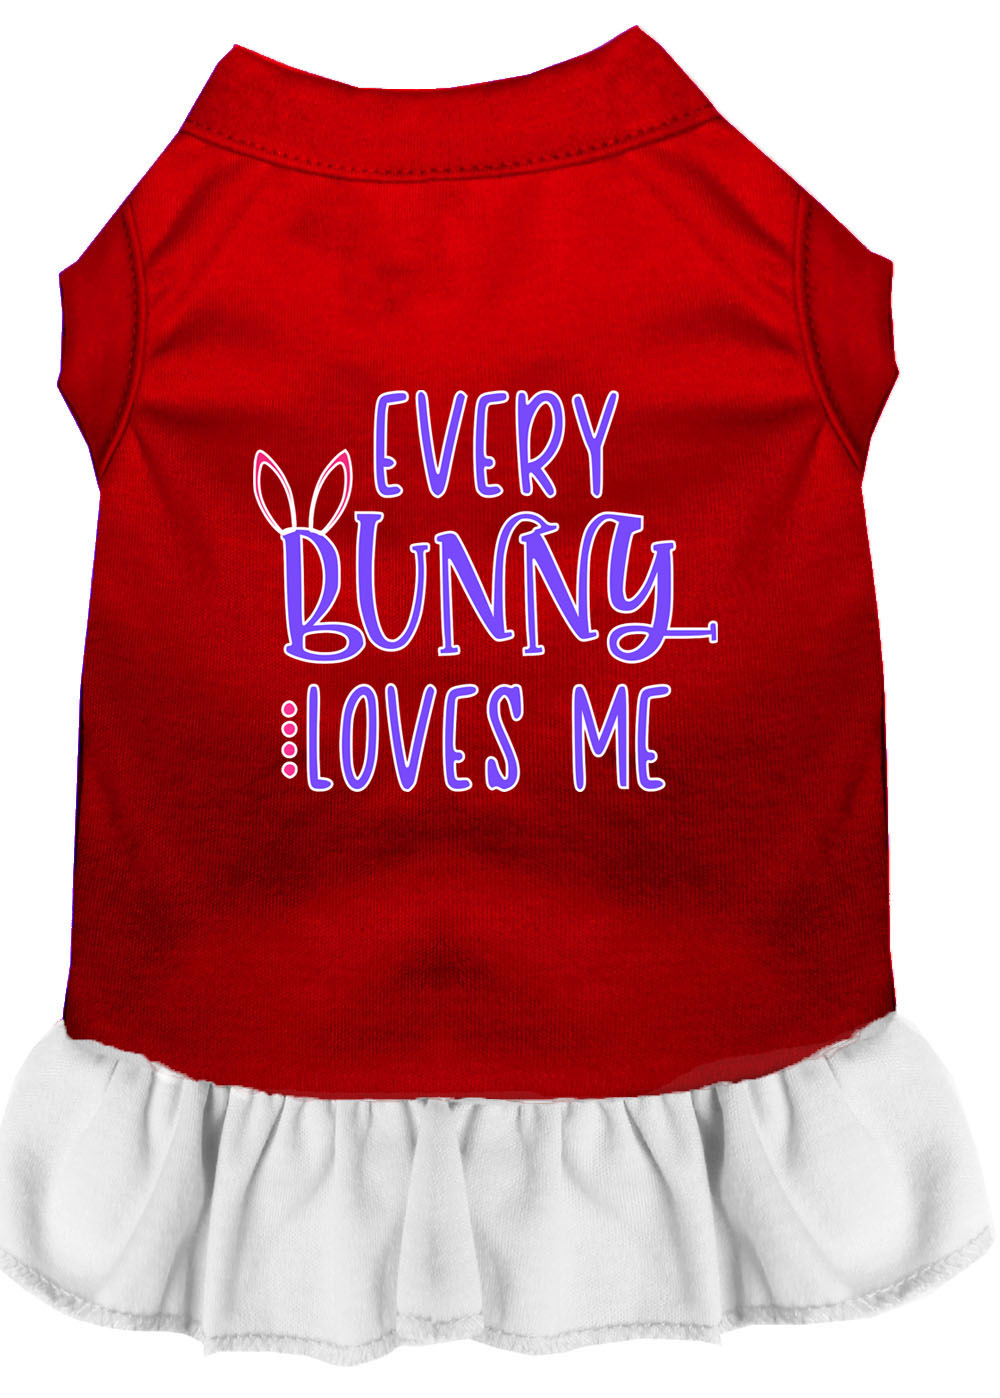 Every Bunny Loves me Screen Print Dog Dress Red with White Lg